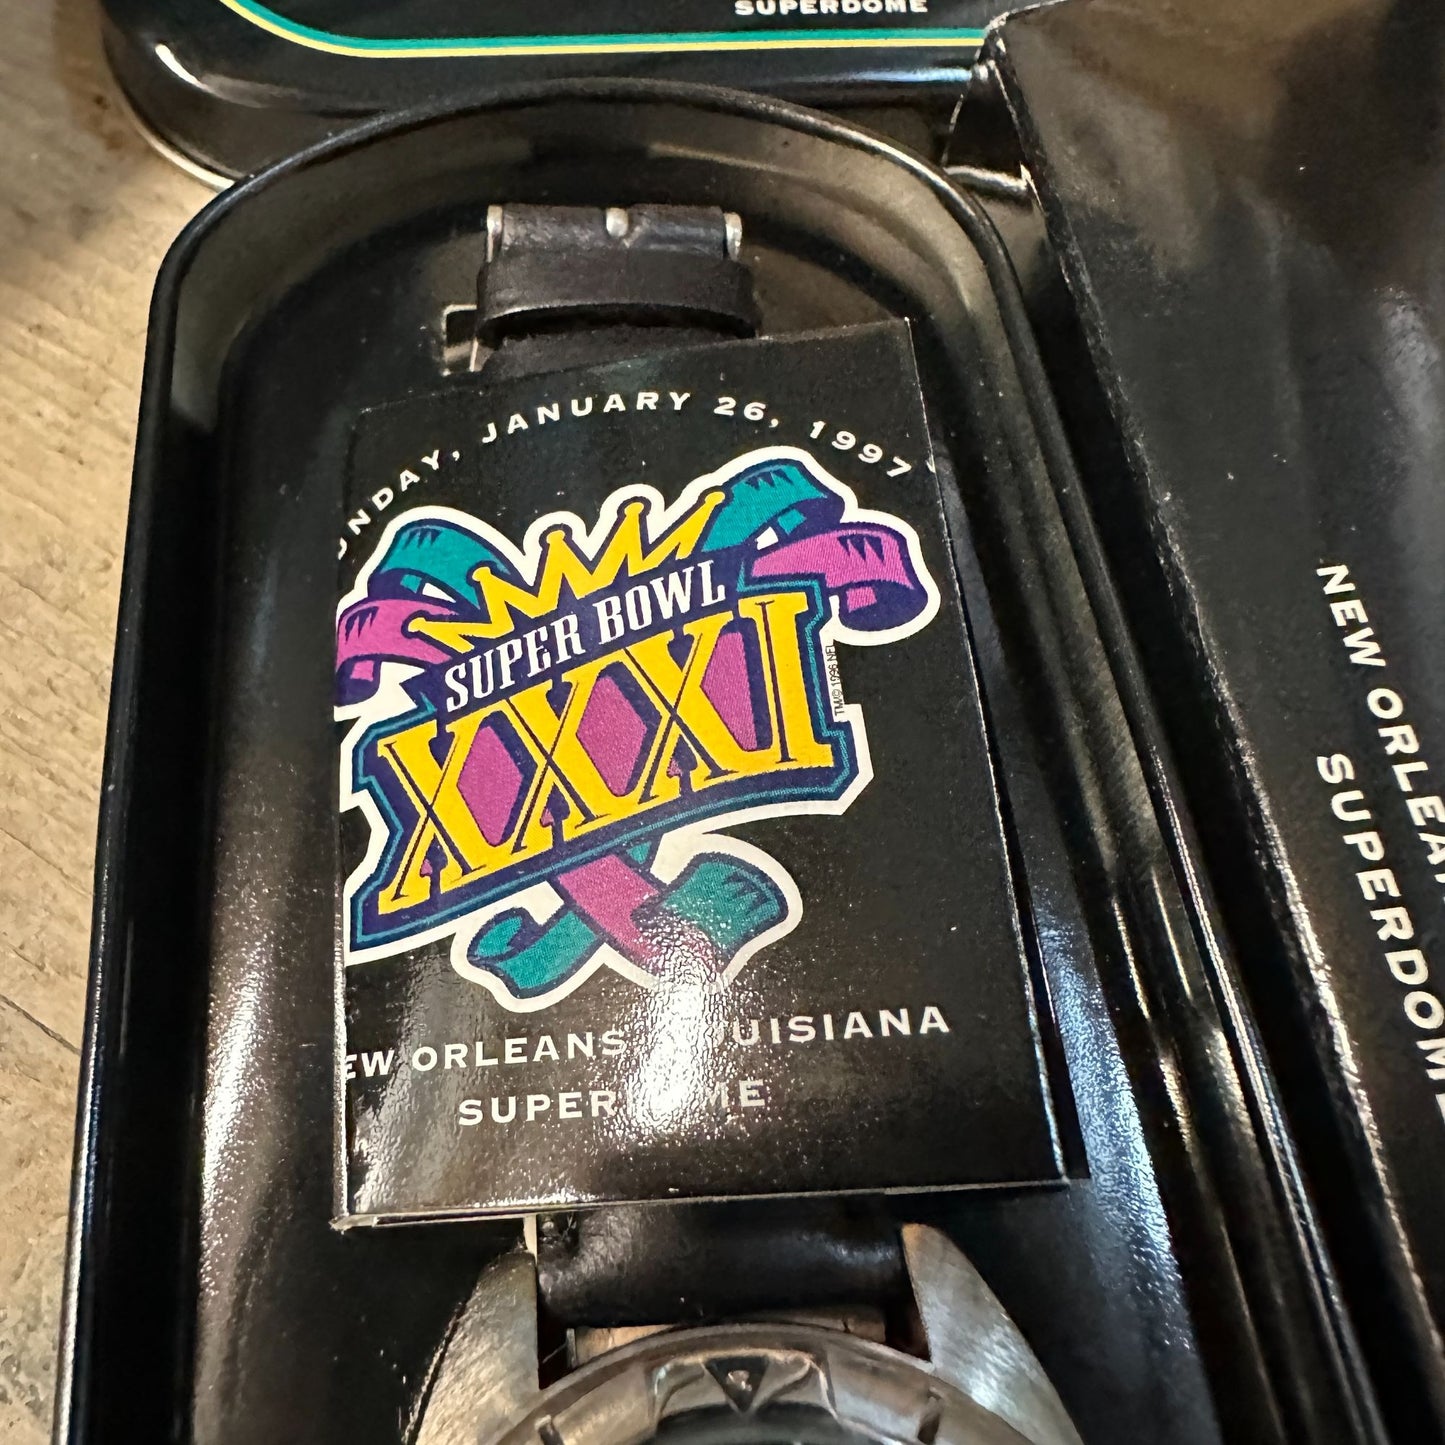 GREEN BAY PACKERS SUPER BOWL XXXI 31 CHAMPIONS 1996-LIMITED EDITION WATCH